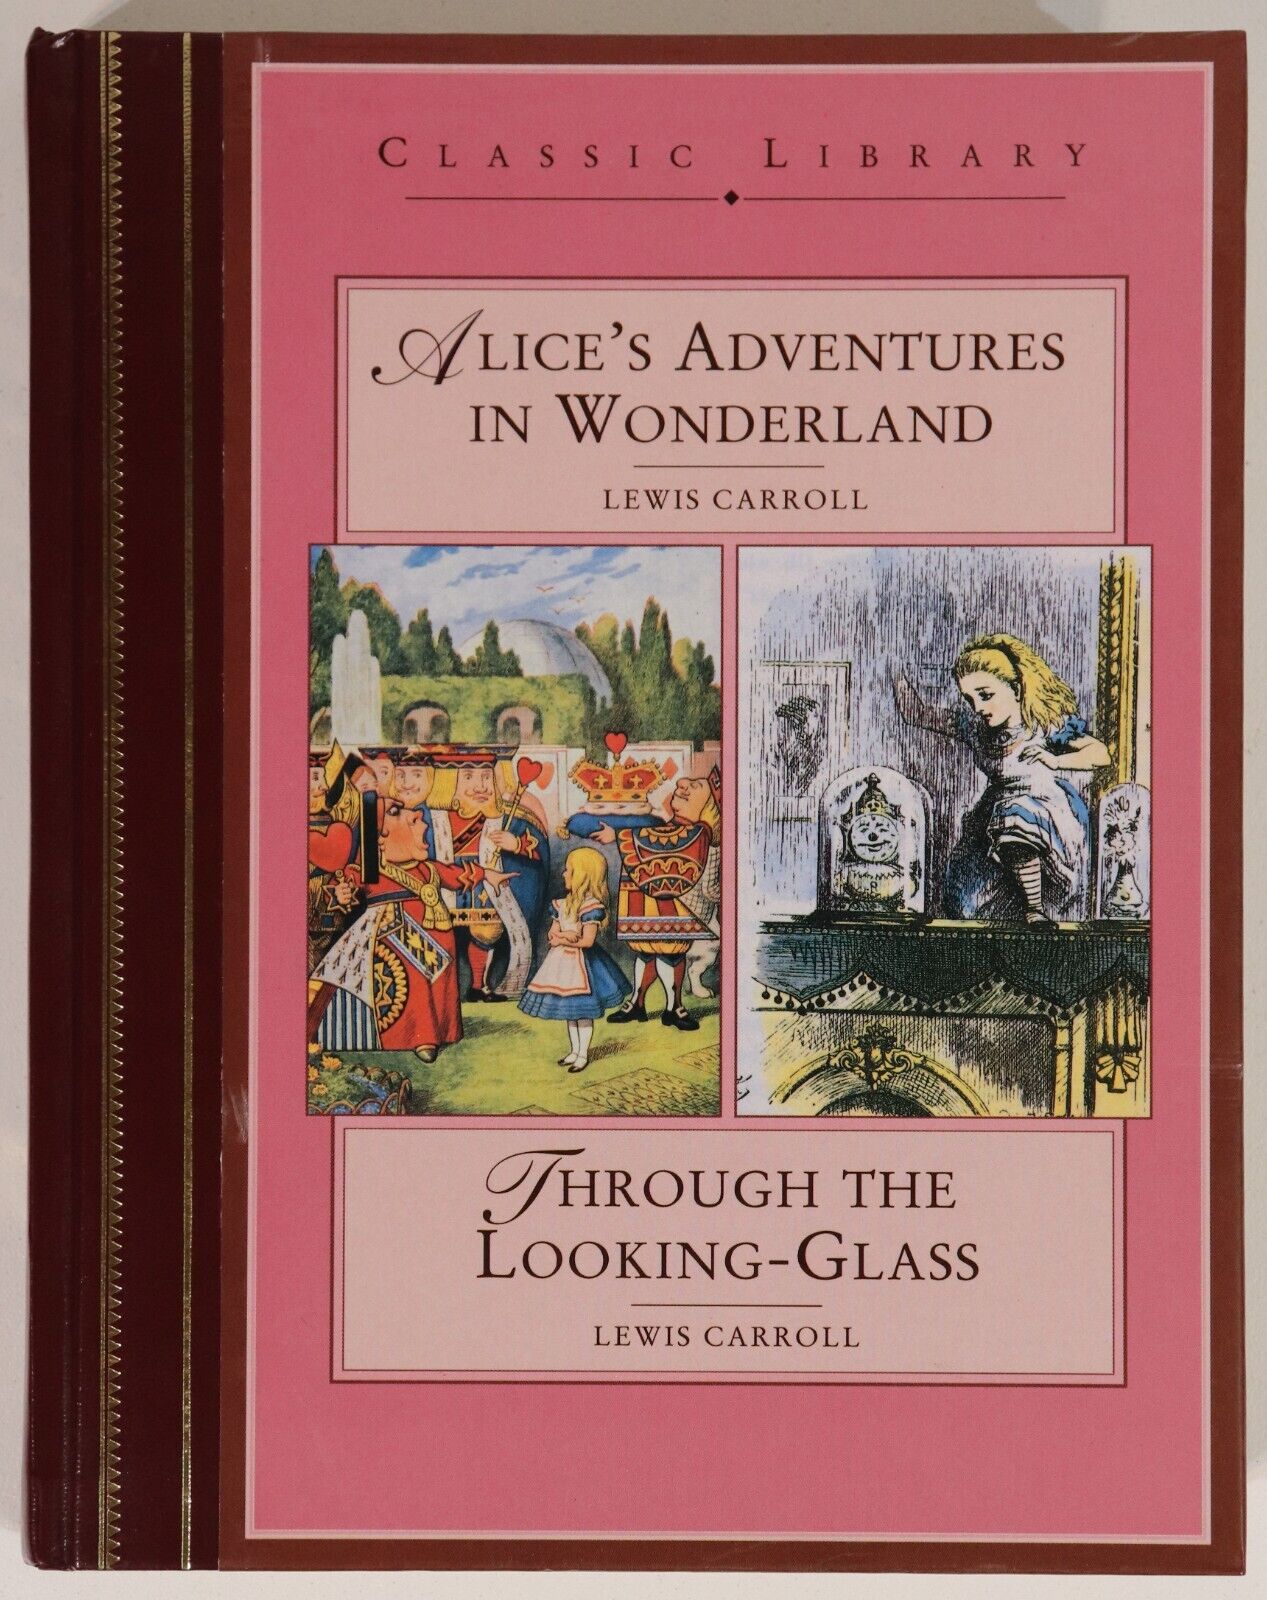 Alice's Adventures In Wonderland by L Carroll - 1998 - Classic Fiction Book